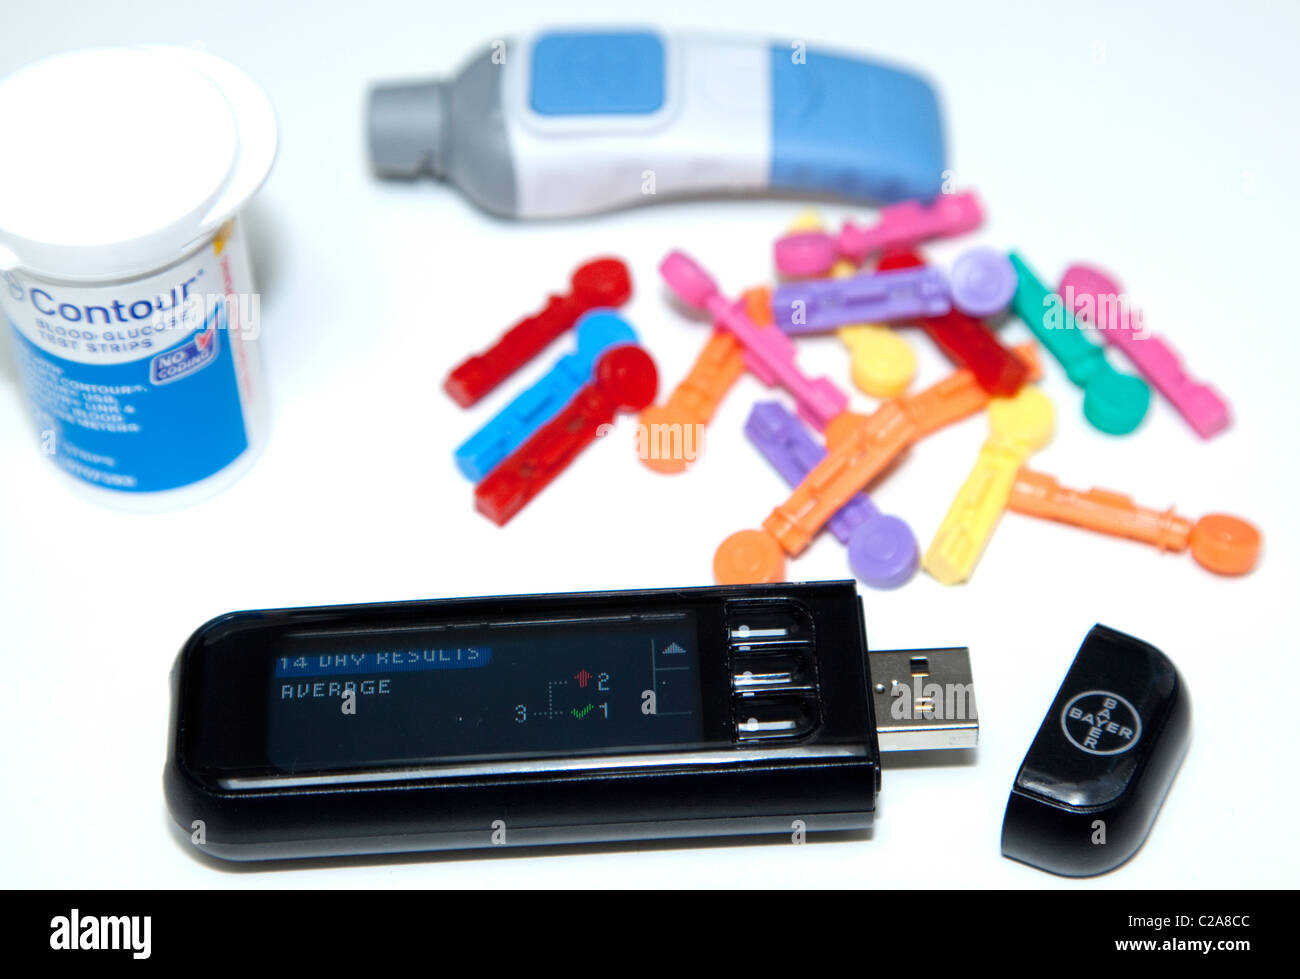 Bayer Contour USB blood glucose meter for diabetes with lancing device,  lancets and test strips Stock Photo - Alamy